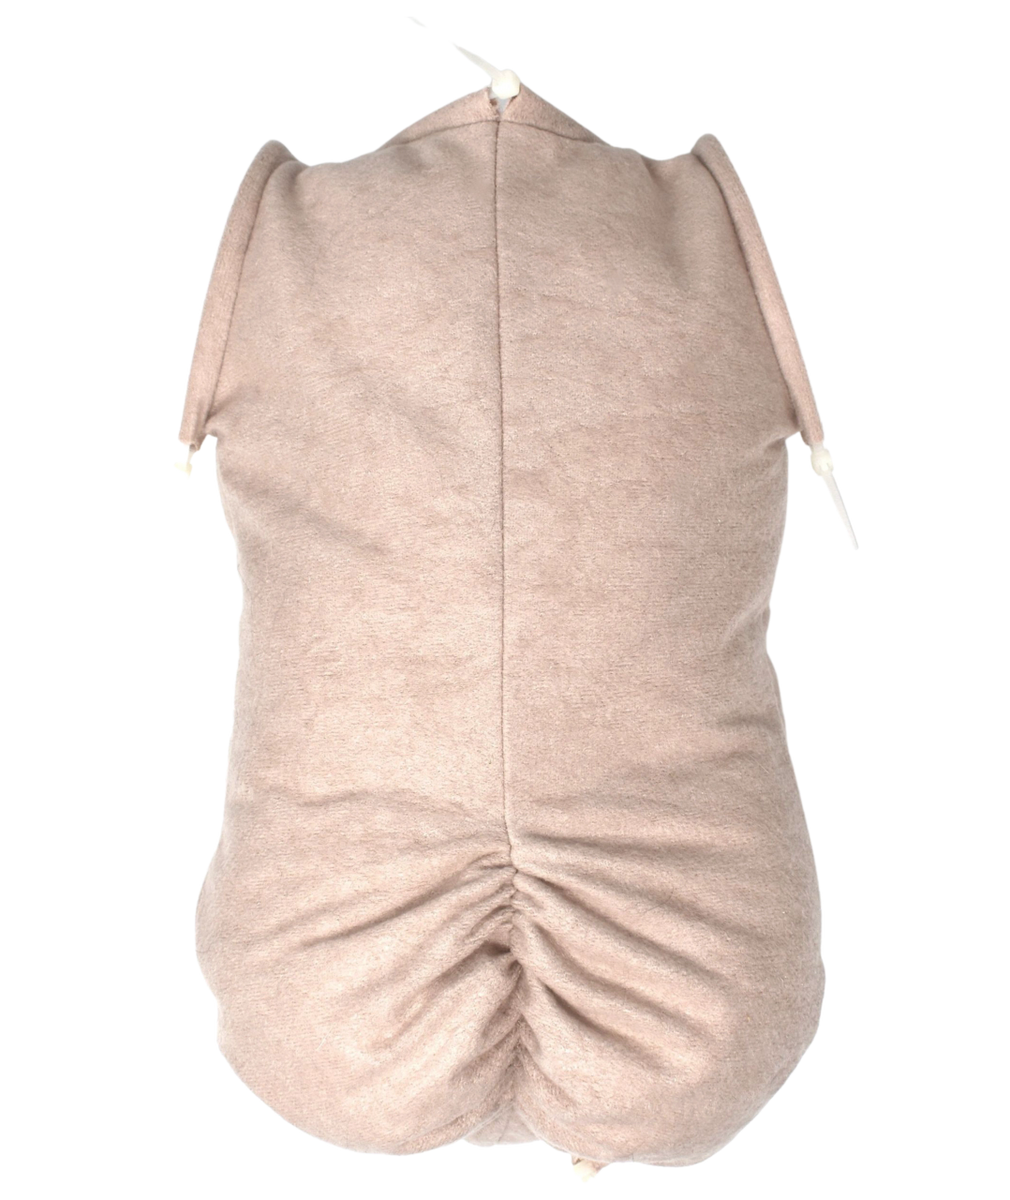 18" to 22" Doe Suede Body For Reborn Doll Kits ~ 4 Sizes and 3 Colors